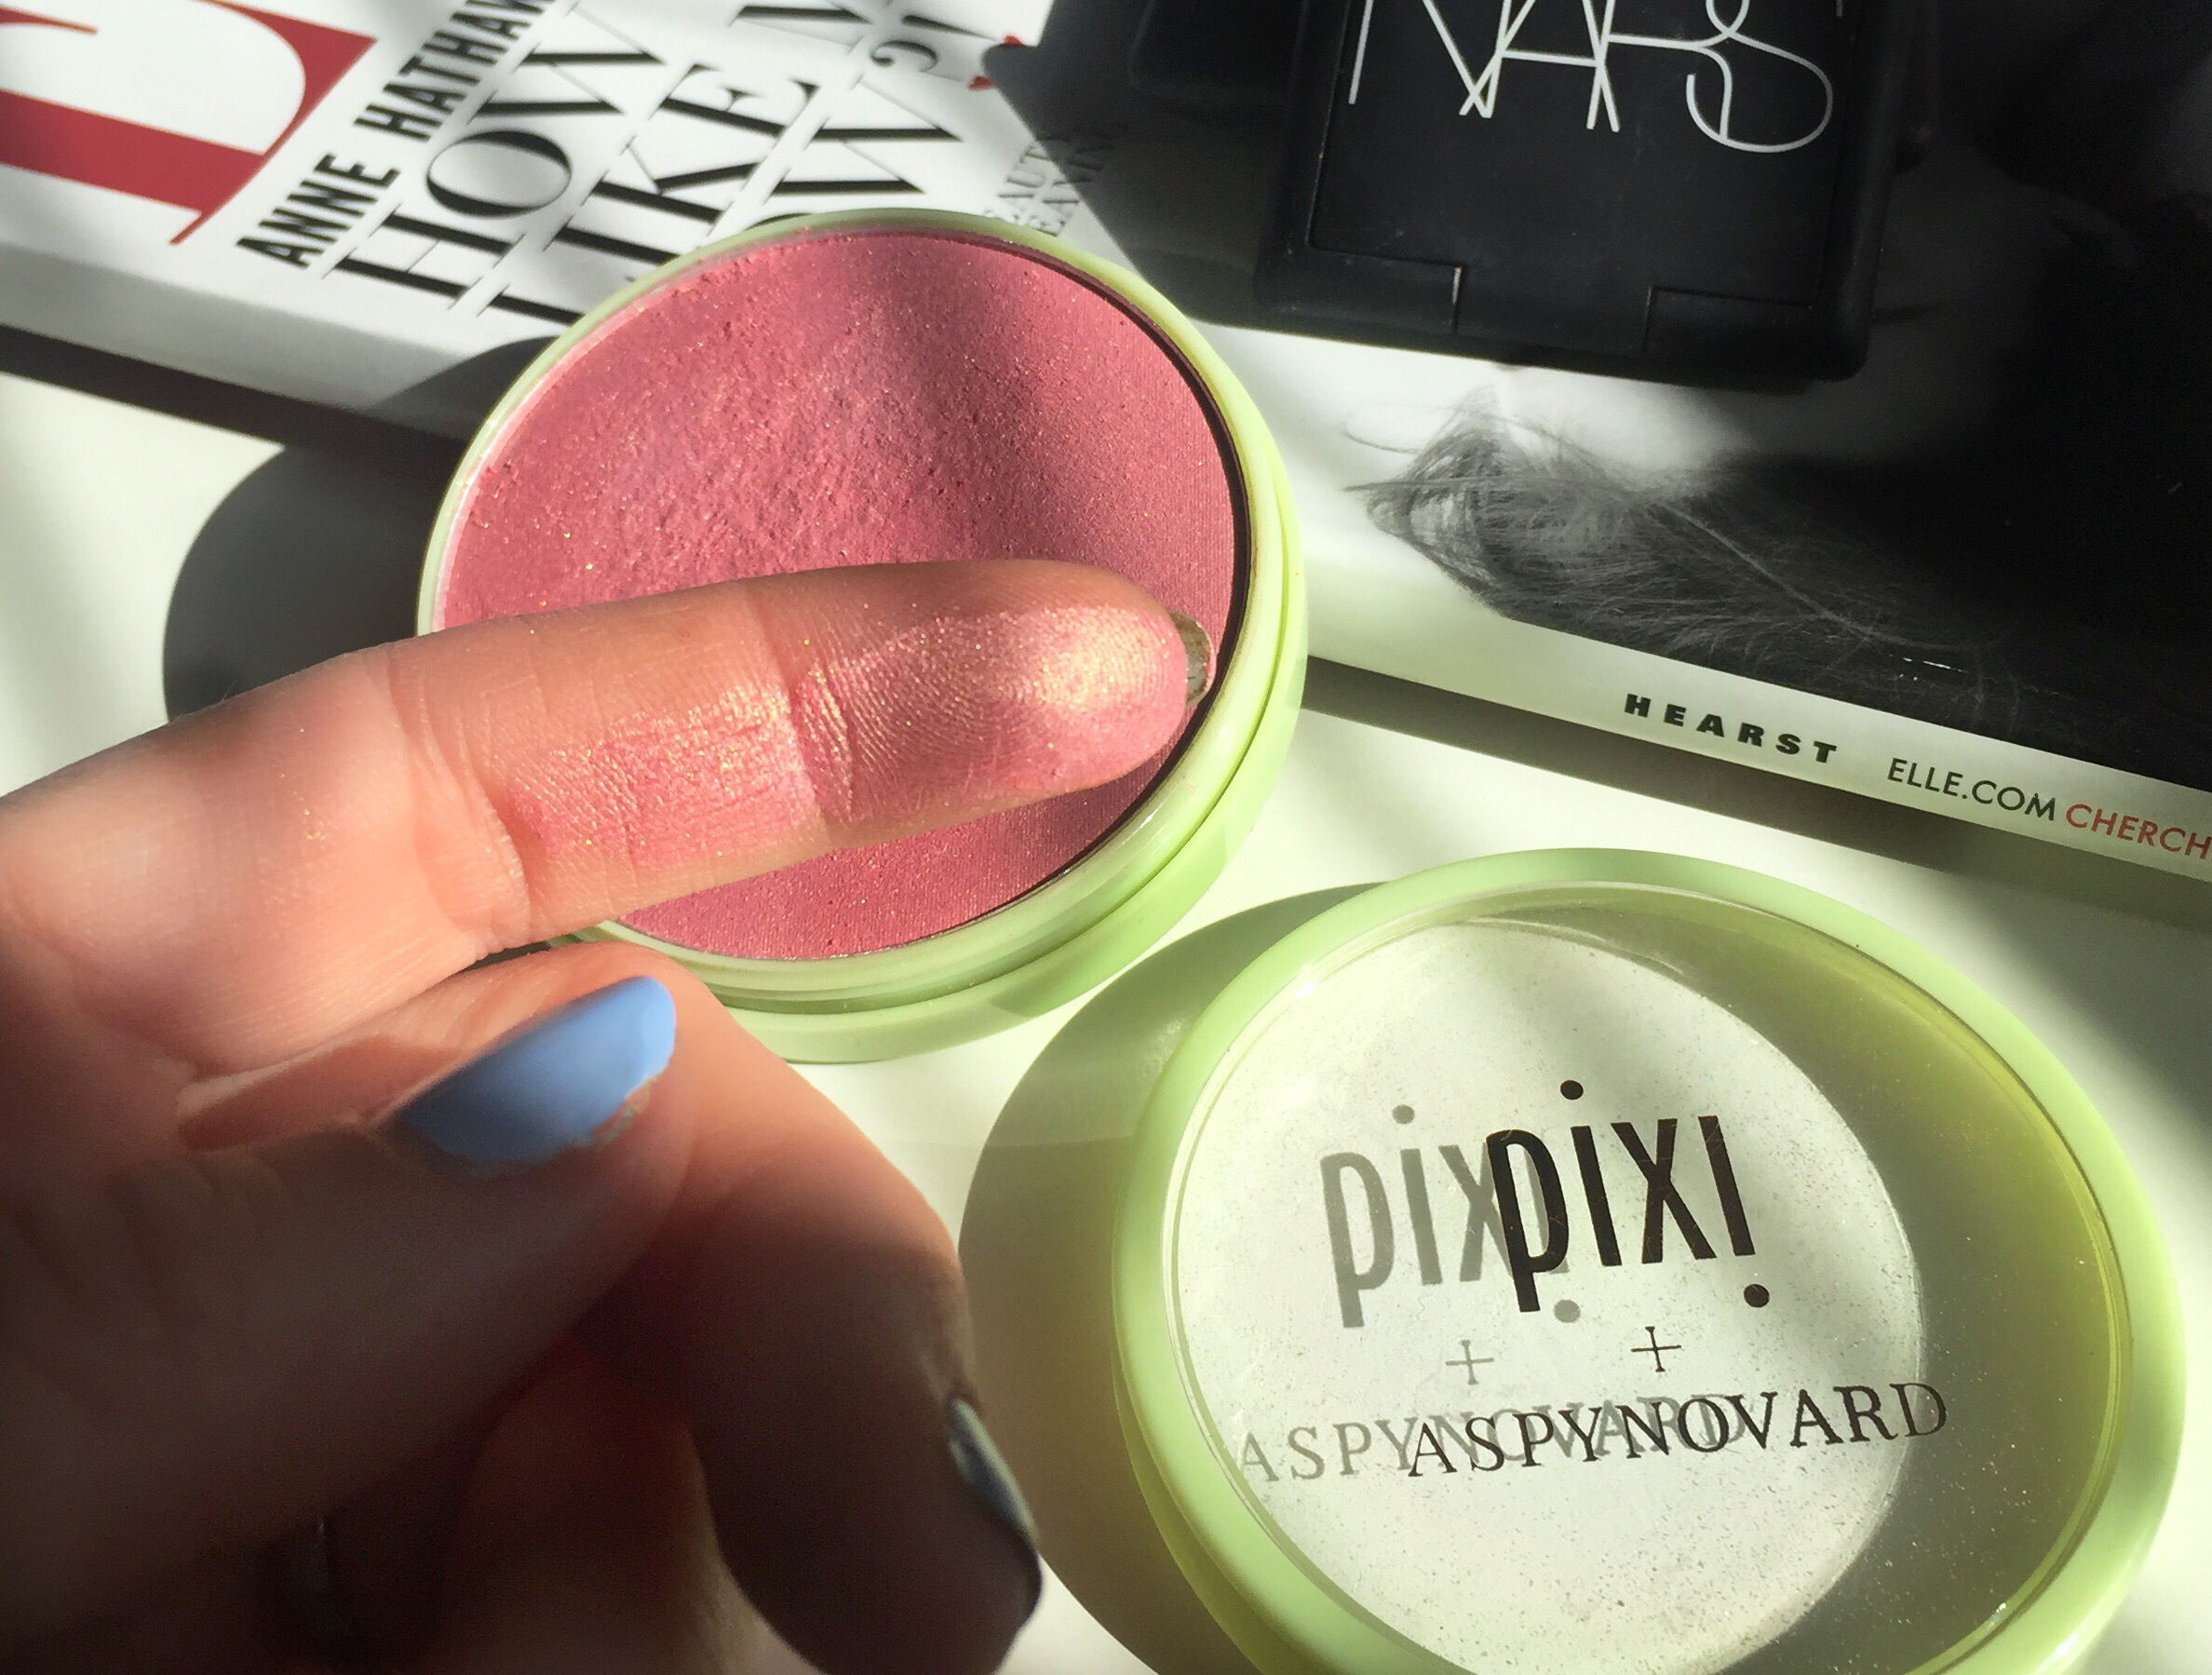 This Iconic Nars Blush Just Got Duped By A Target Look A Like